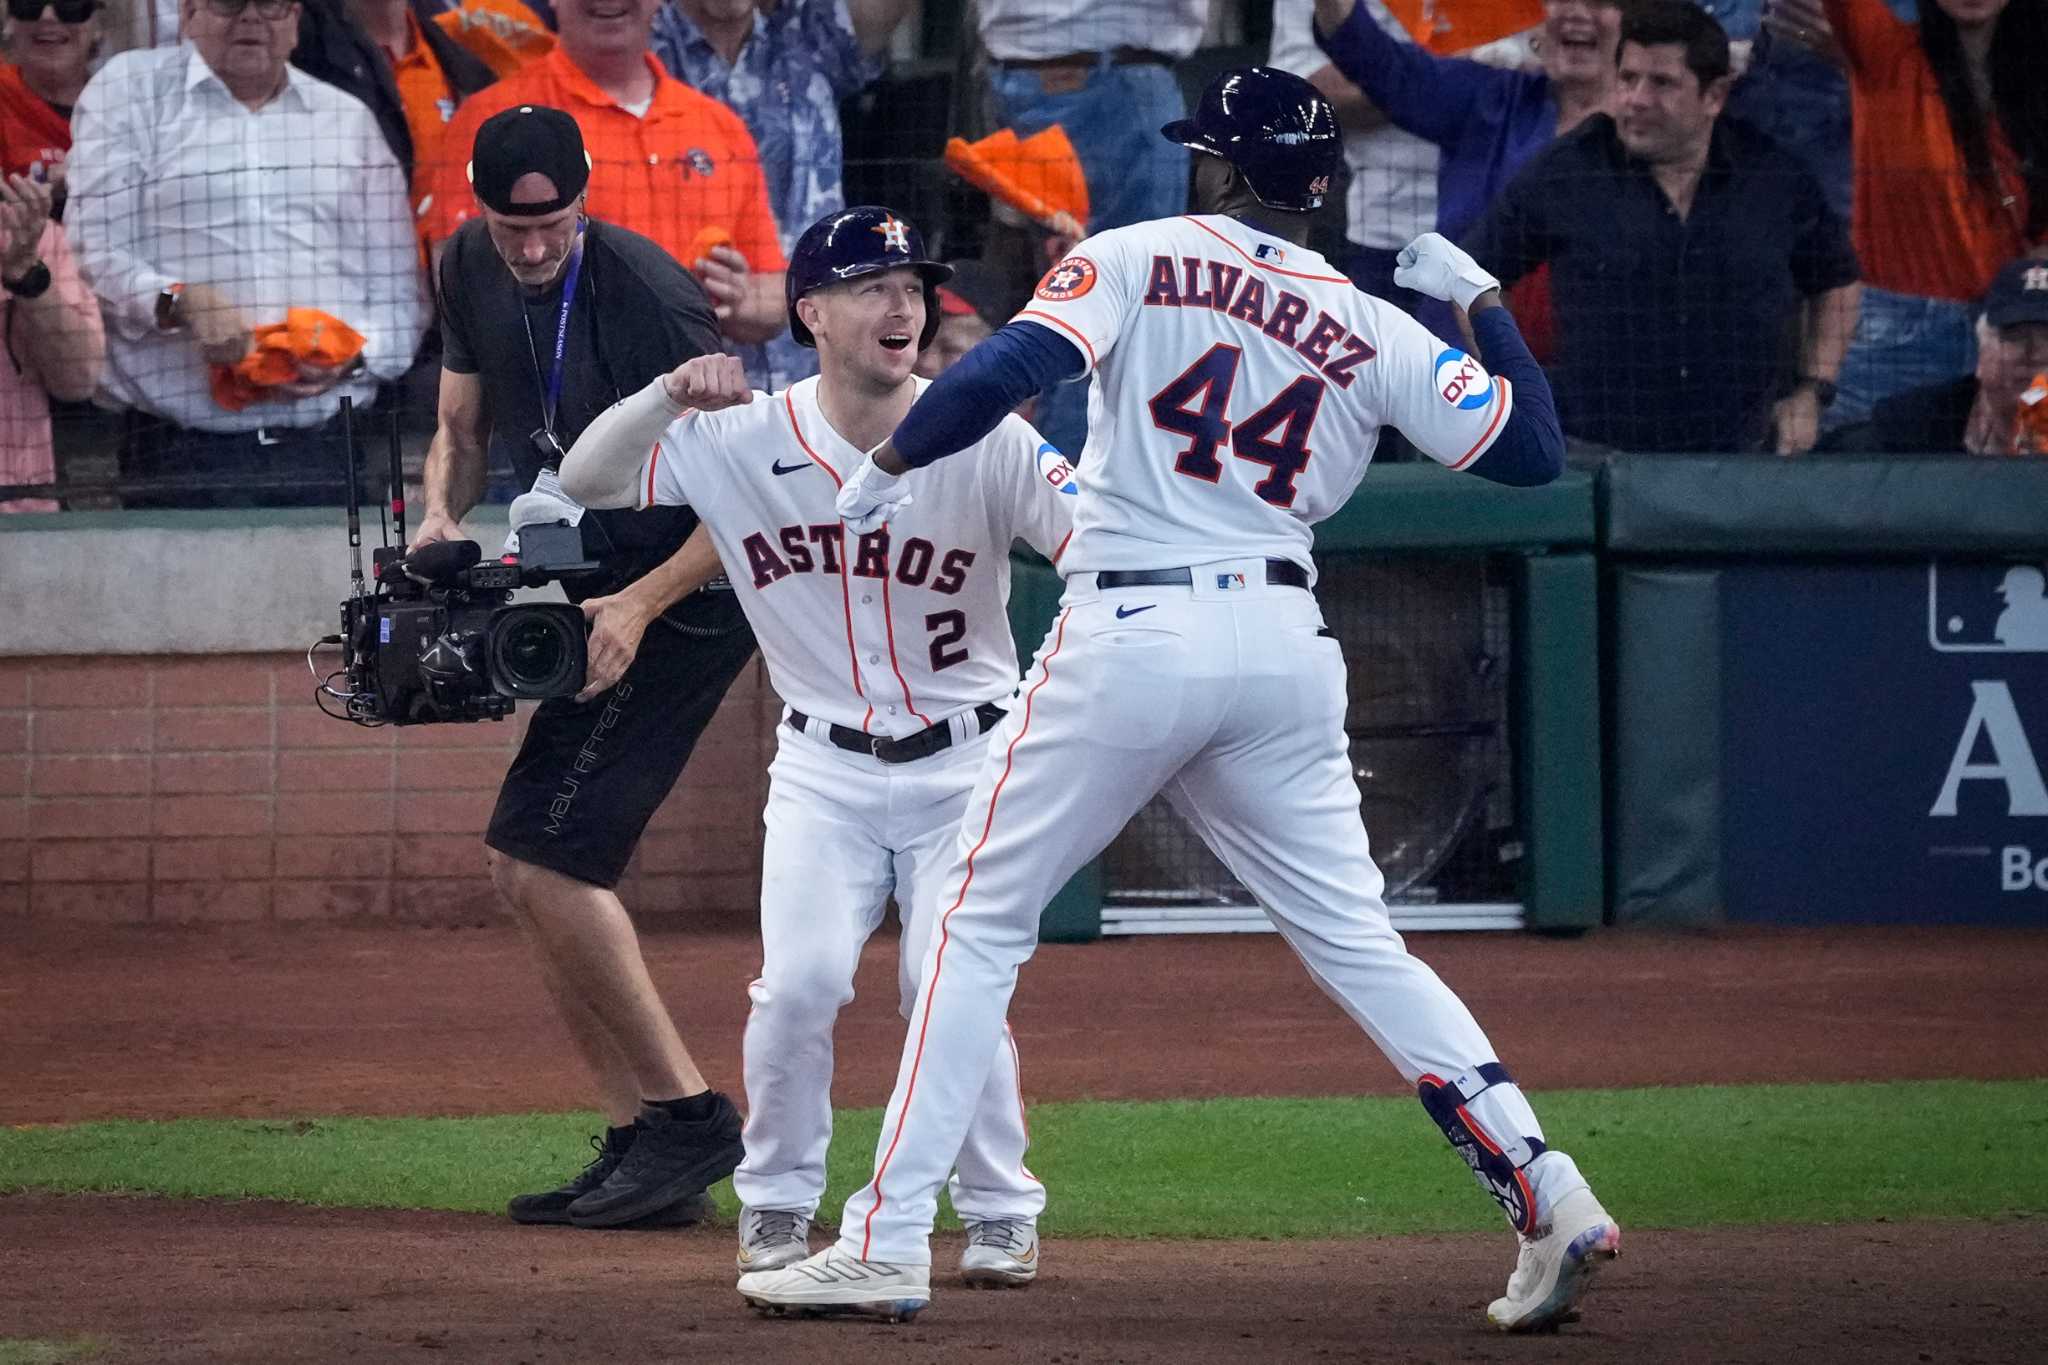 Houston Astros seek to become MLB's first repeat champ in 23 years